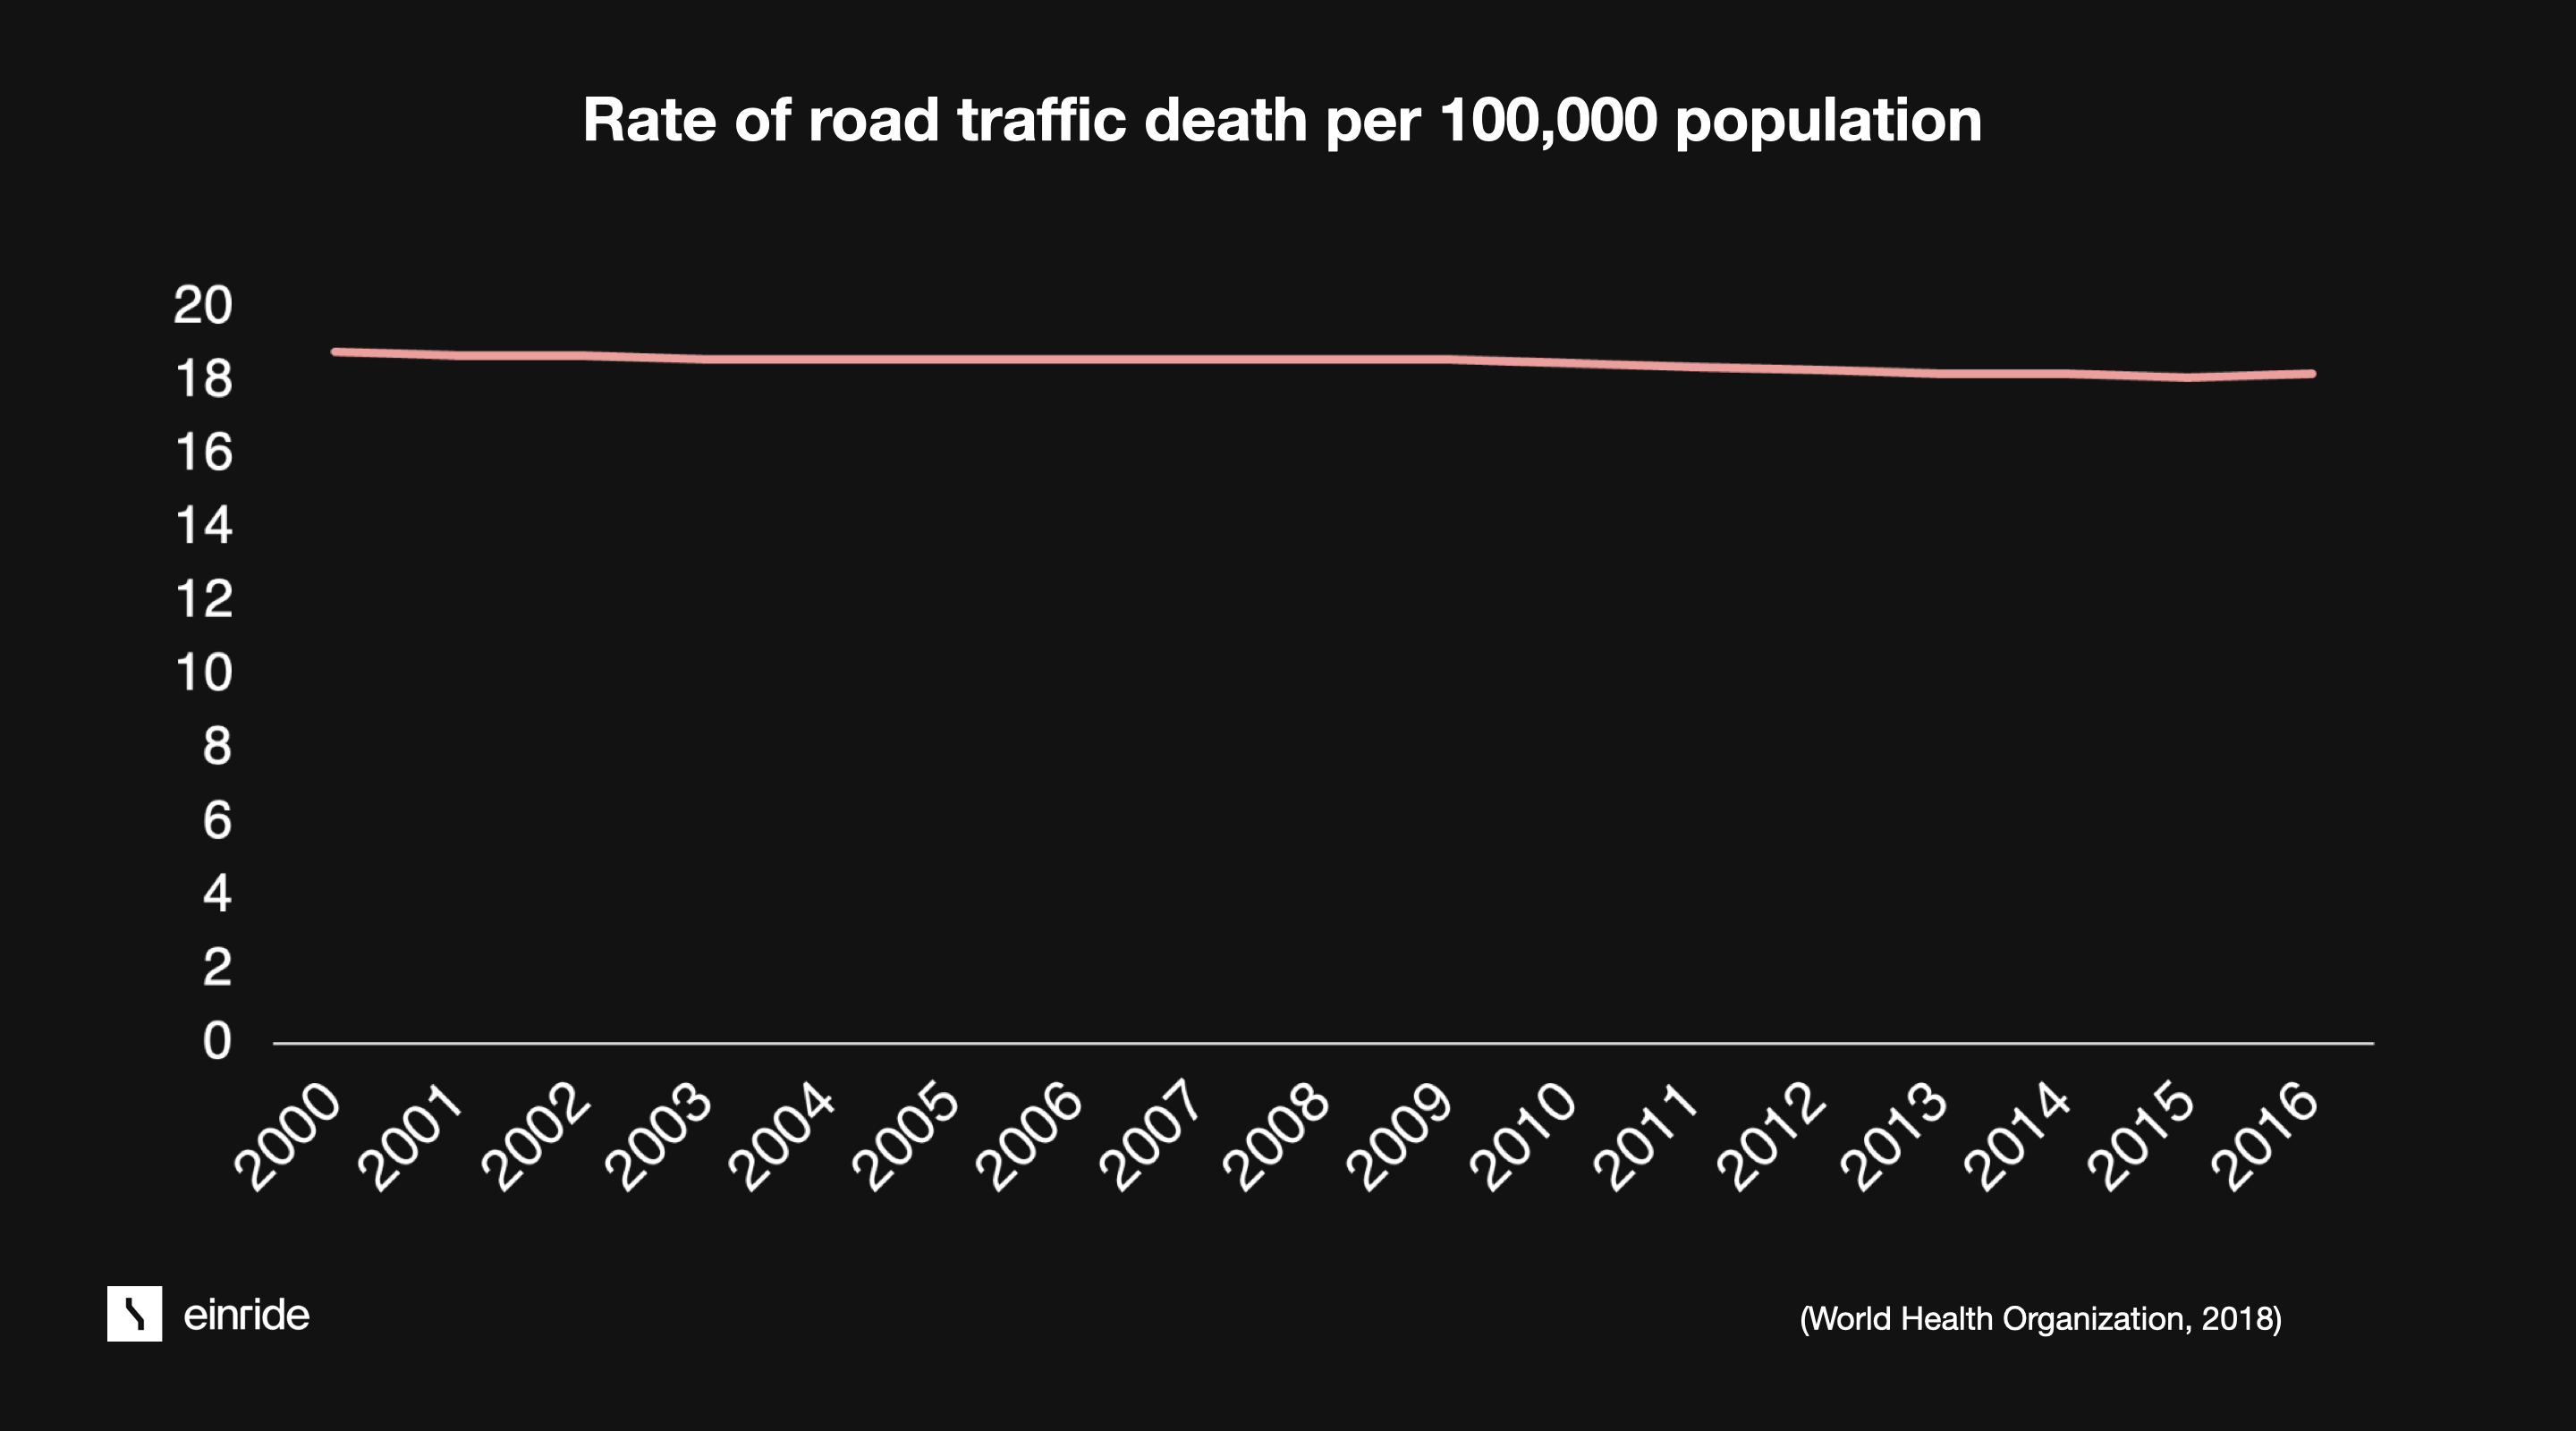 Rate of road traffic deaths